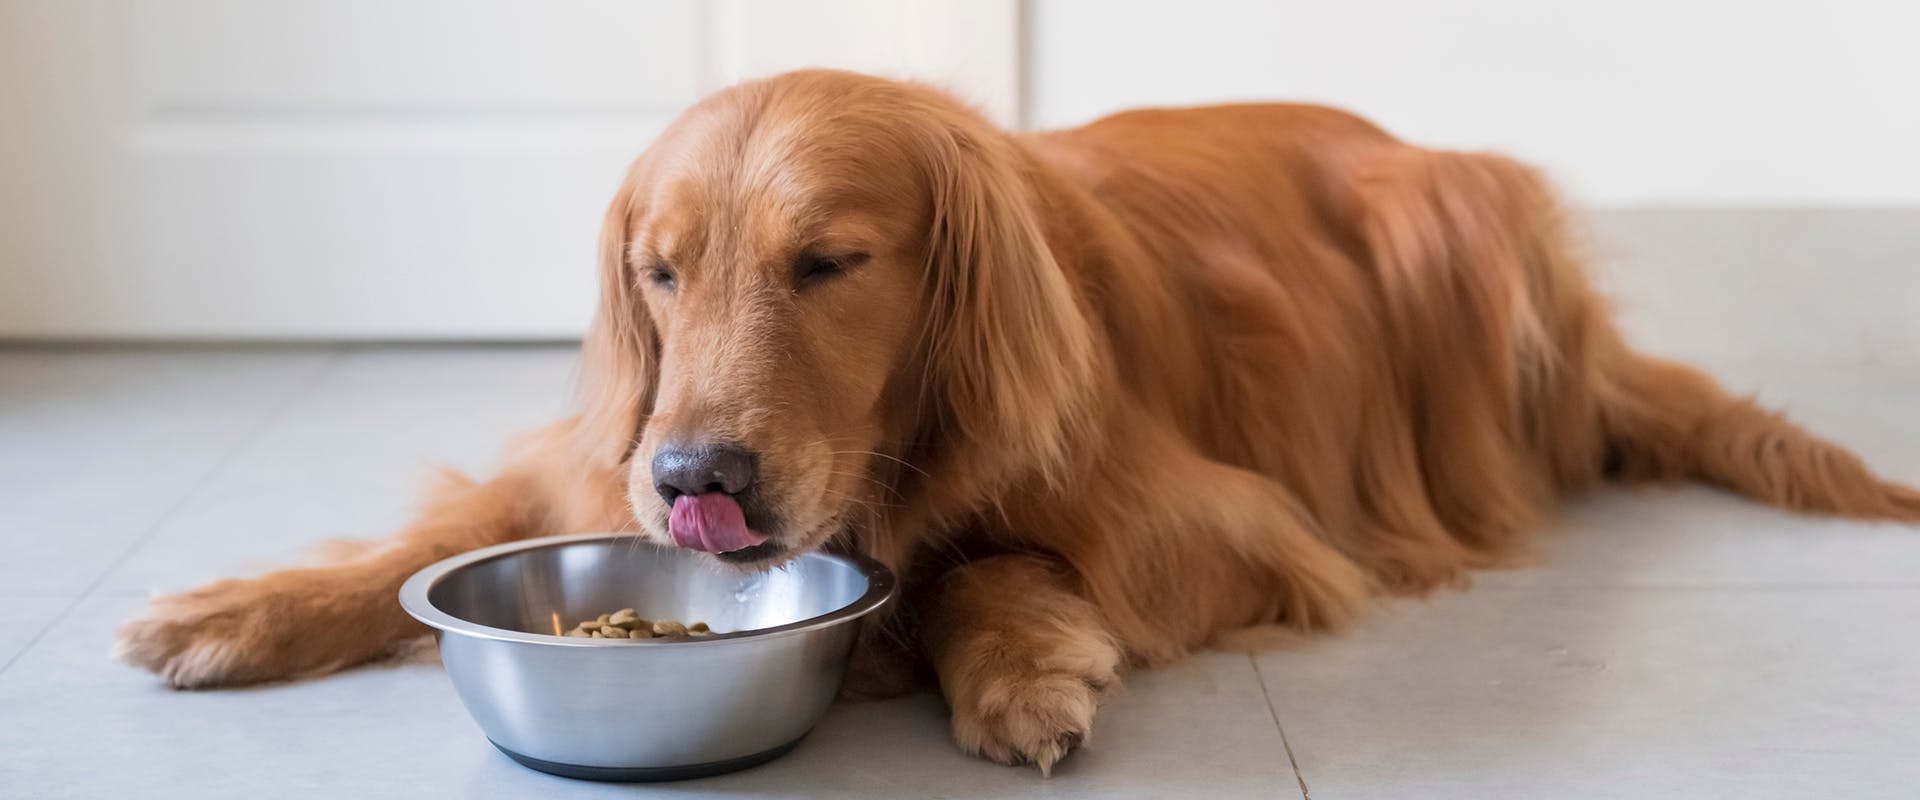 A dog sitting on a kitchen floor, eating from a stainless steel dog bowl